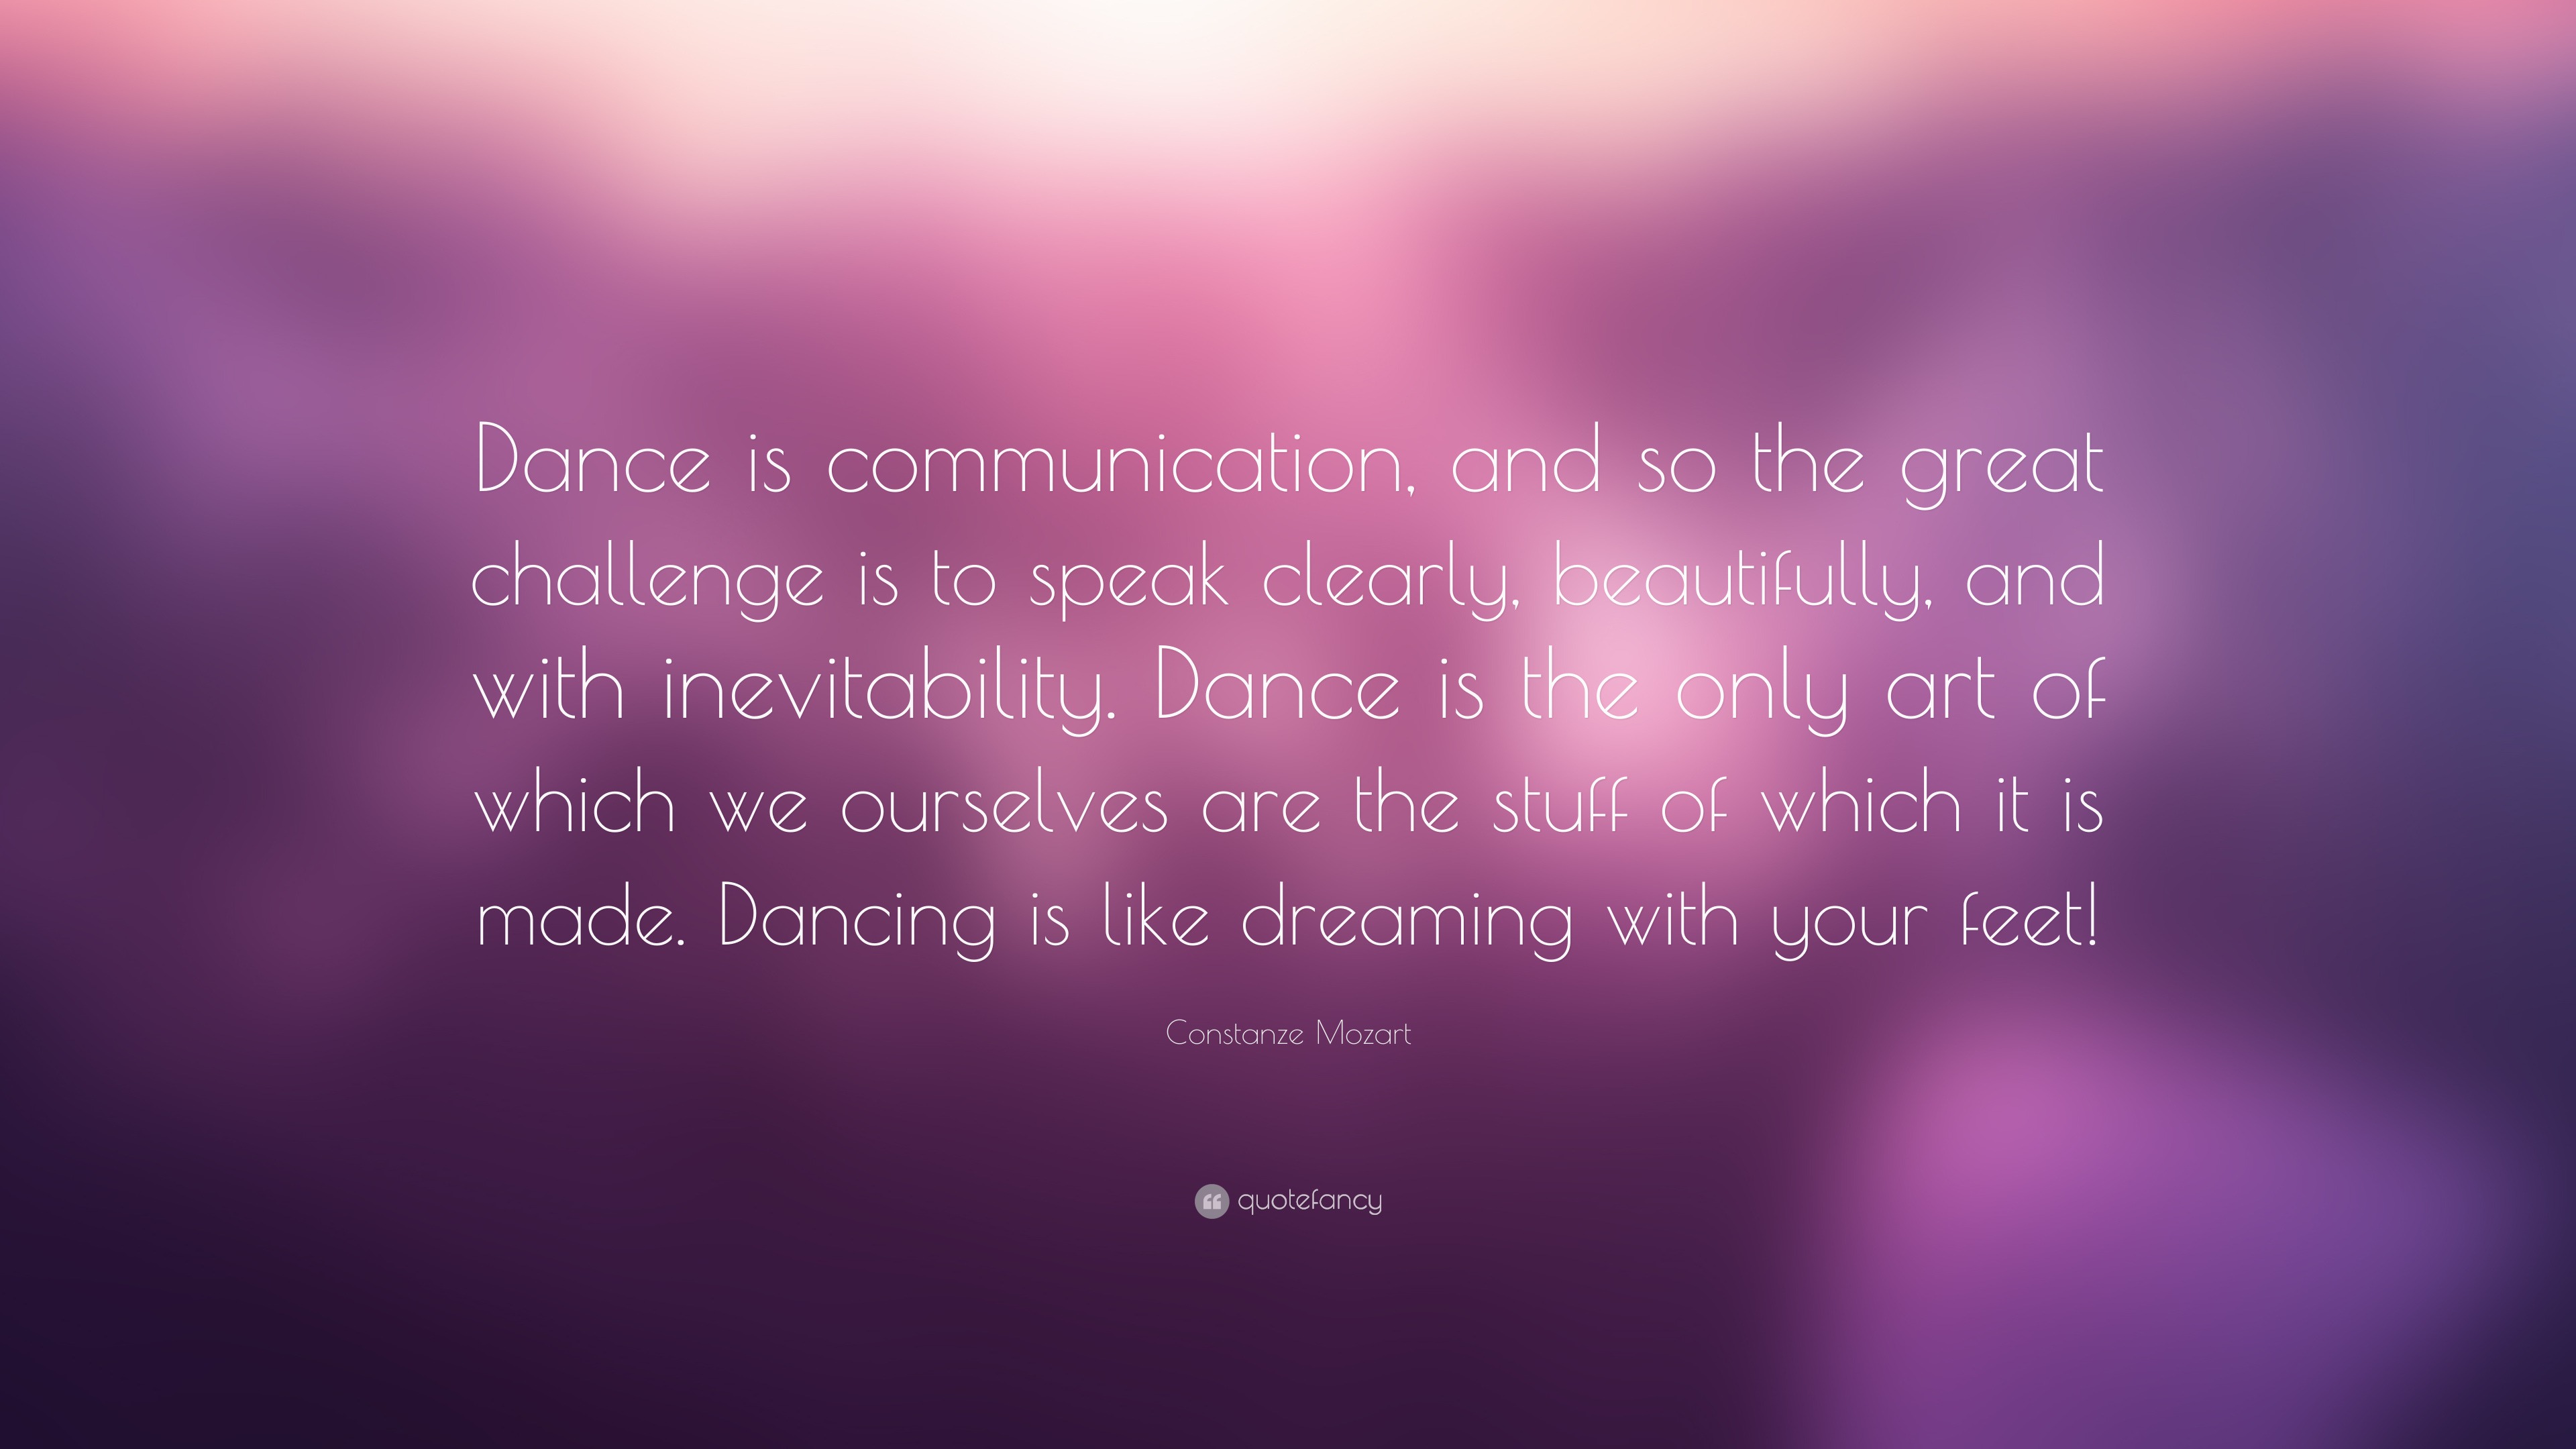 Constanze Mozart Quote: “Dance is communication, and so the great challenge  is to speak clearly, beautifully, and with inevitability. Dance is th”